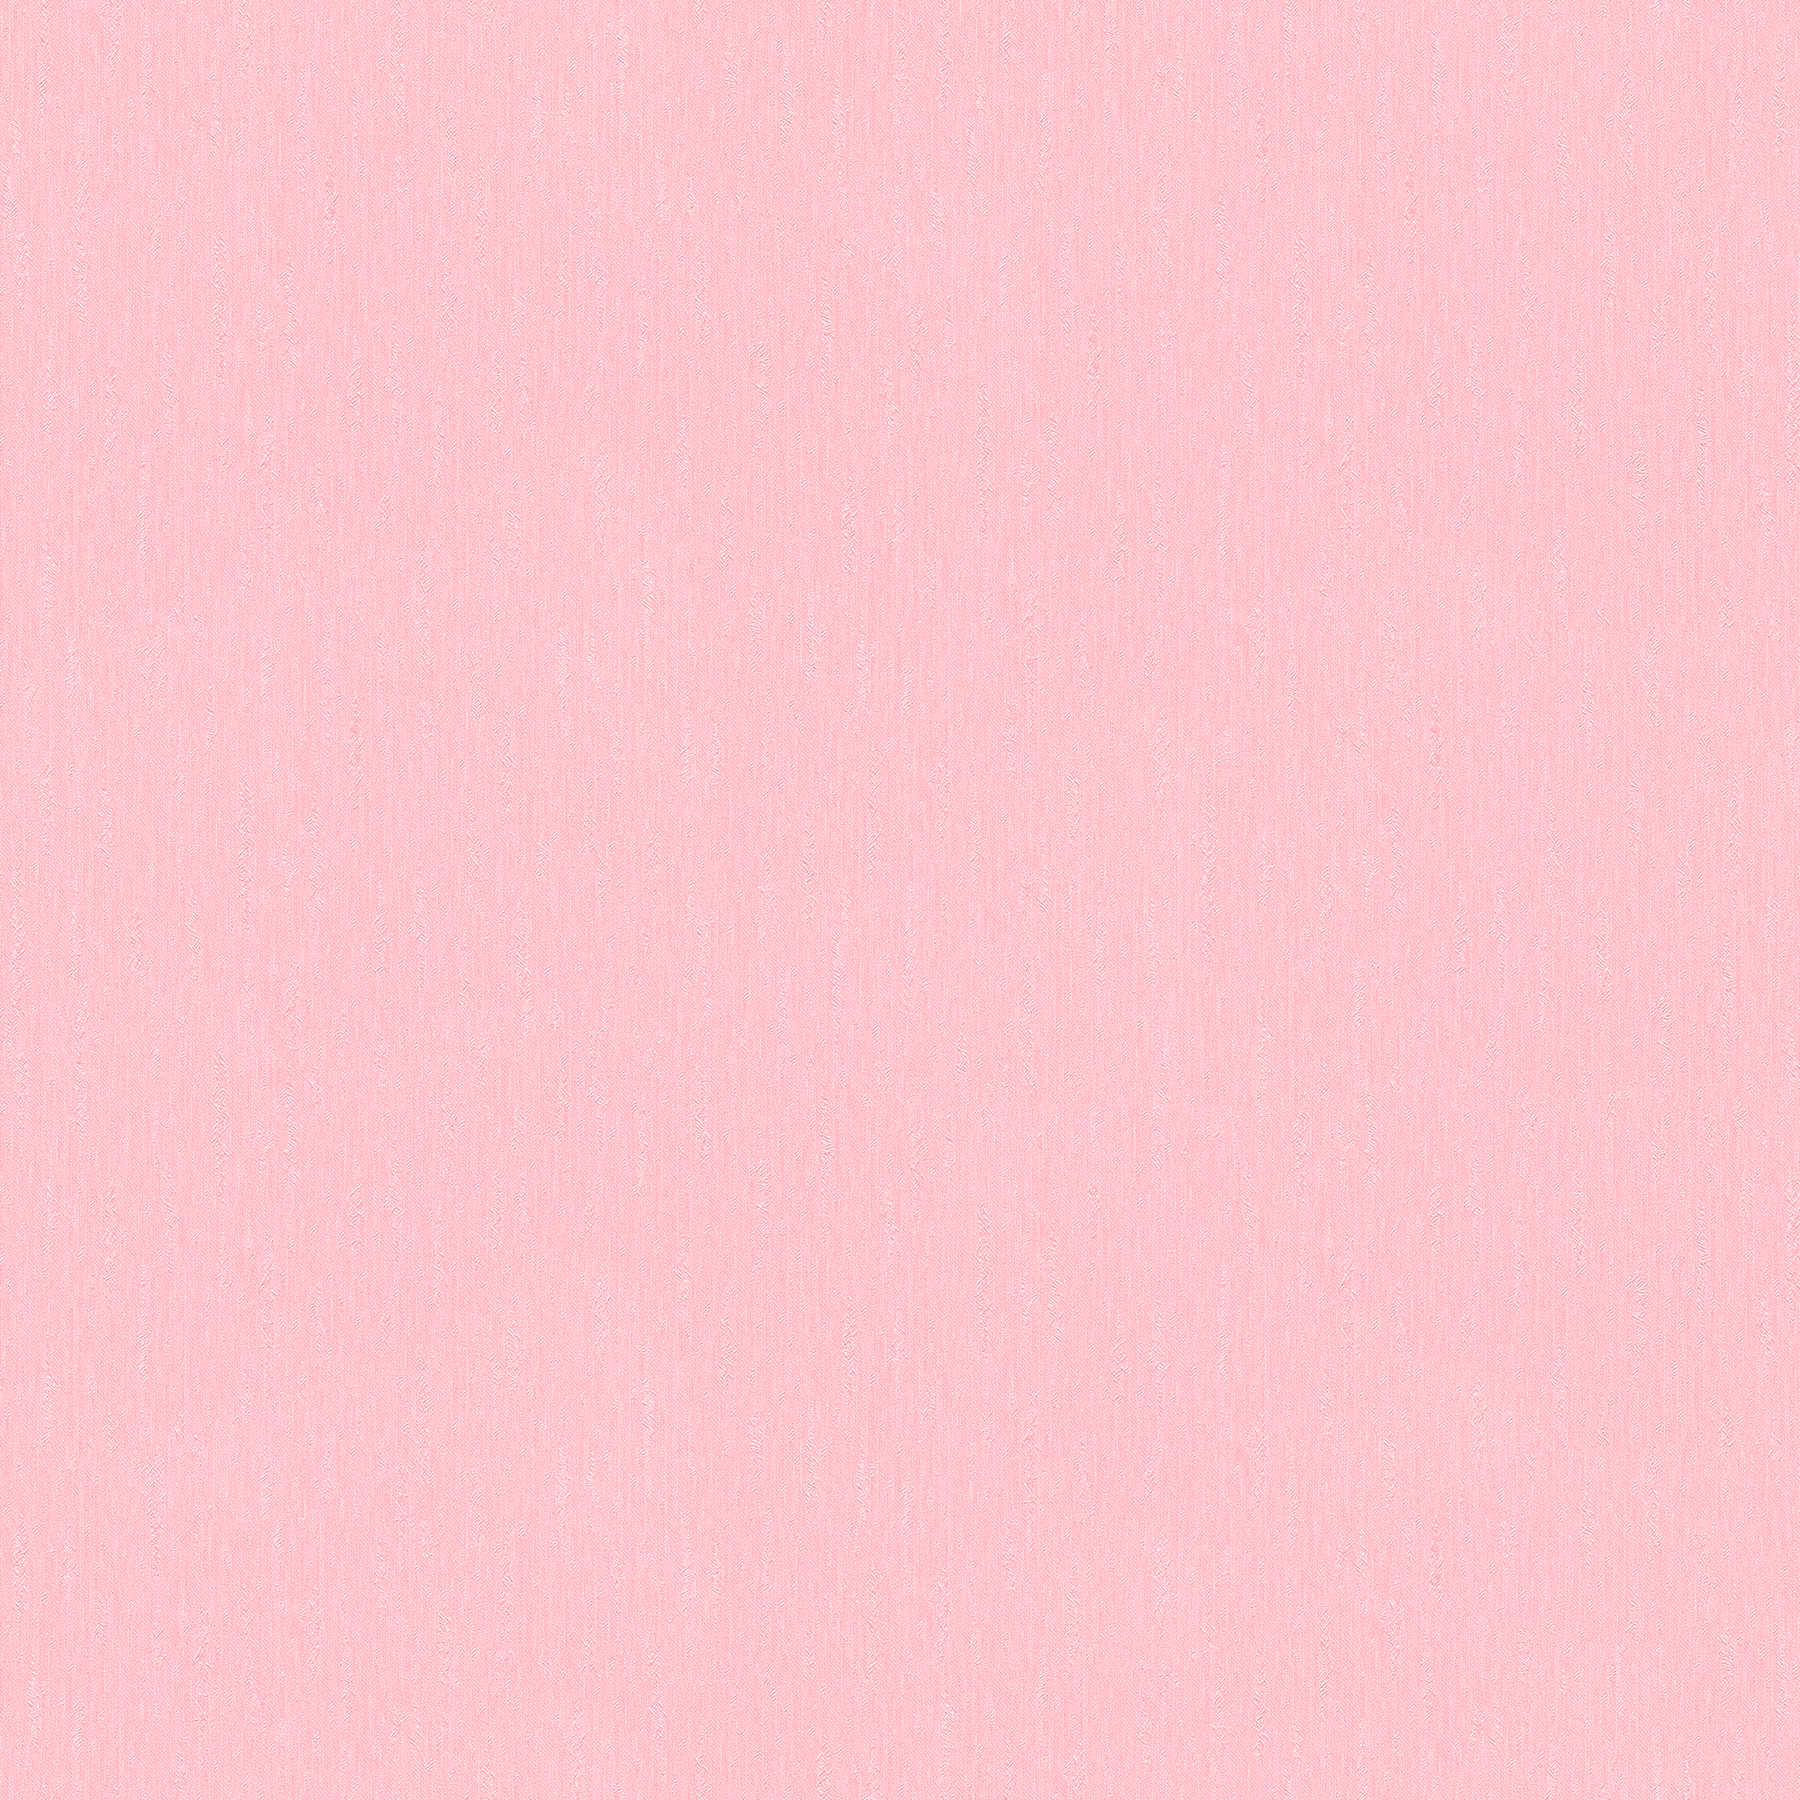 Pink non-woven wallpaper plain light pink with texture surface
